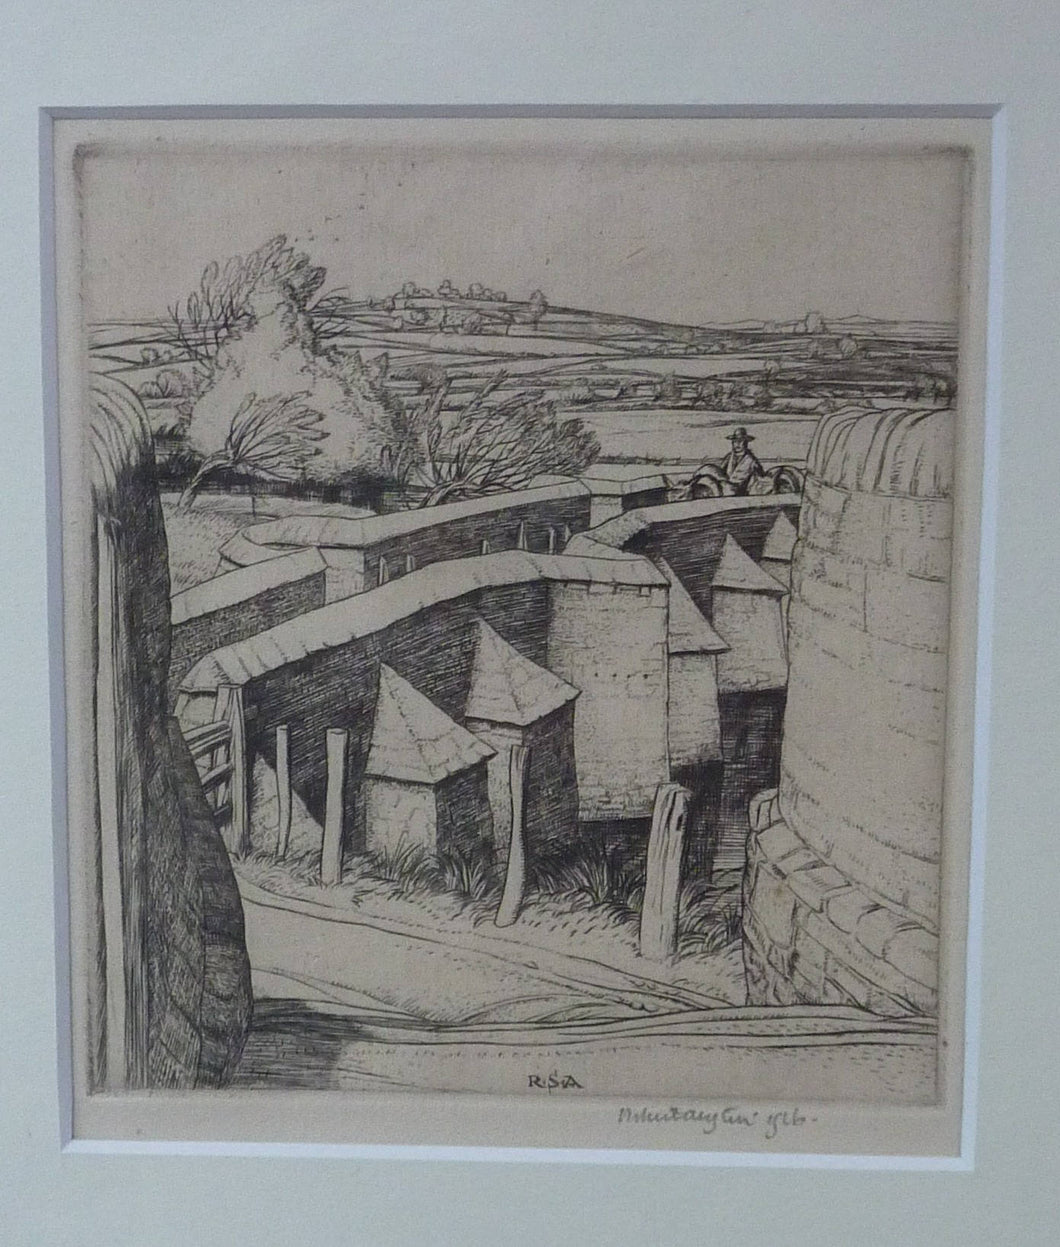 ORIGINAL Line Engraving by Robert Sargent Austin. The Pack Bridge, Aylestone, Leicestershire. Pencil signed and dated 1926